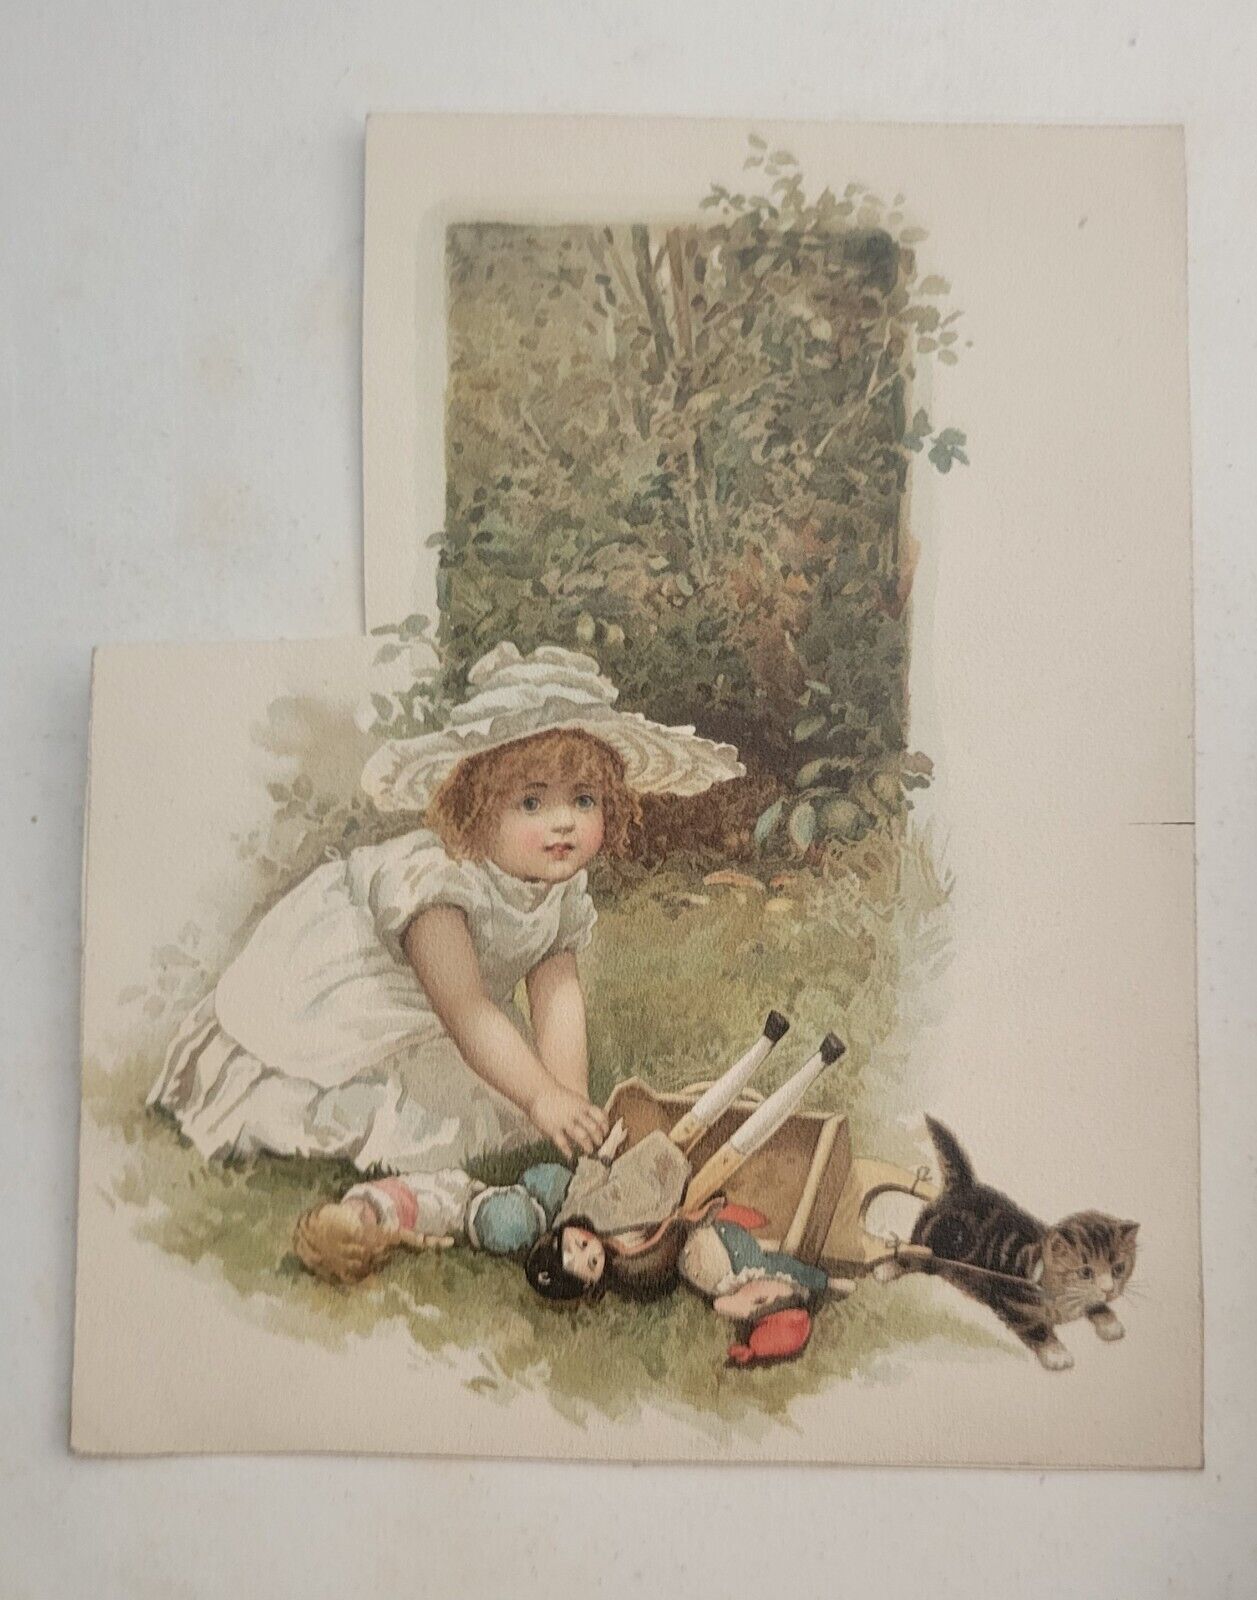 Antique Chromolithograph Victorian Scrap Girl w Kitten Pulling Toy Wagon 1800s